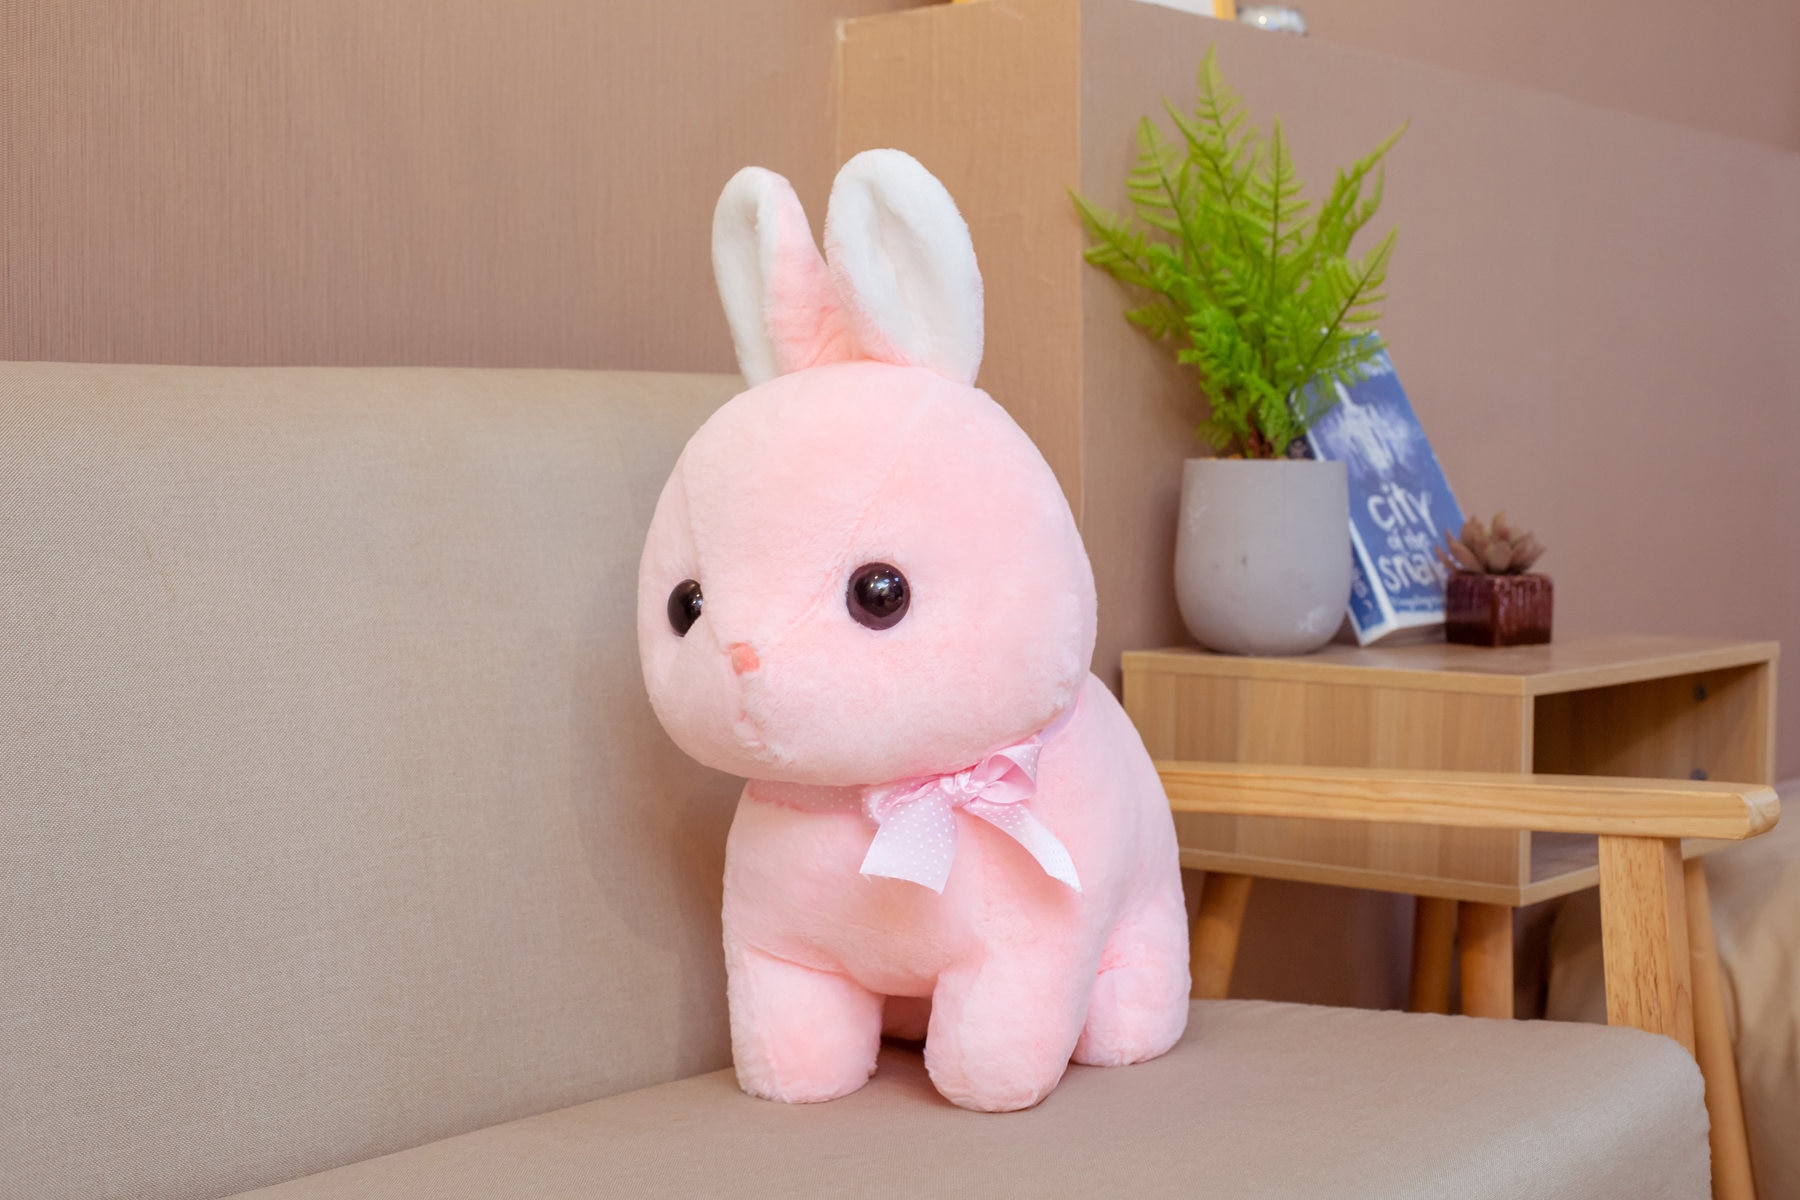 30/45cm Lovely Simulation Rabbit Plush Toys Stuffed Kawaii Anime Doll for Kids Baby Soft Animal Toy Cute Birthday Gift for Lover